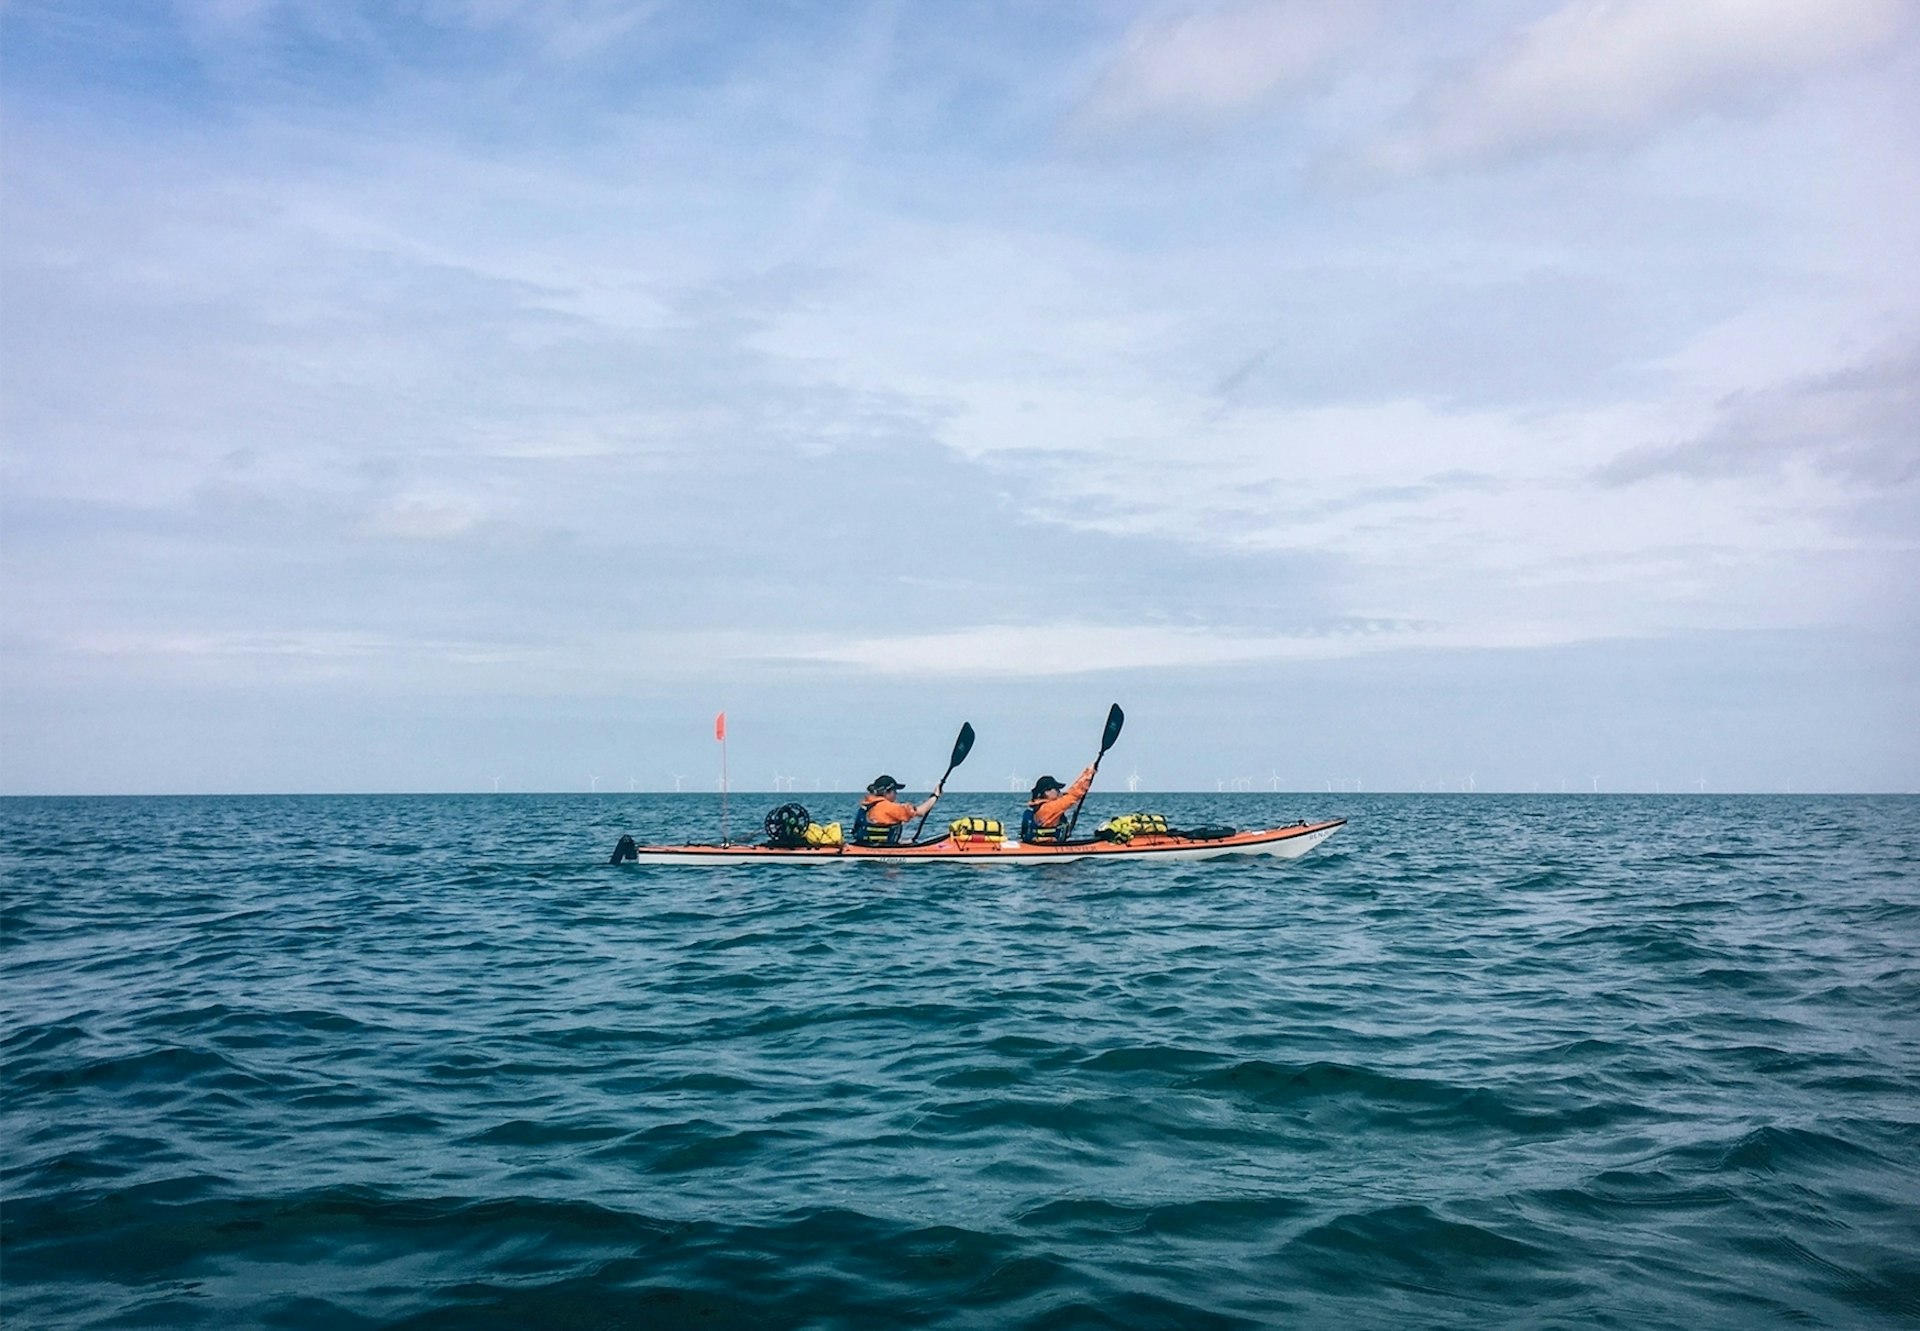 The women kayaking 4,000km from London to the Black Sea